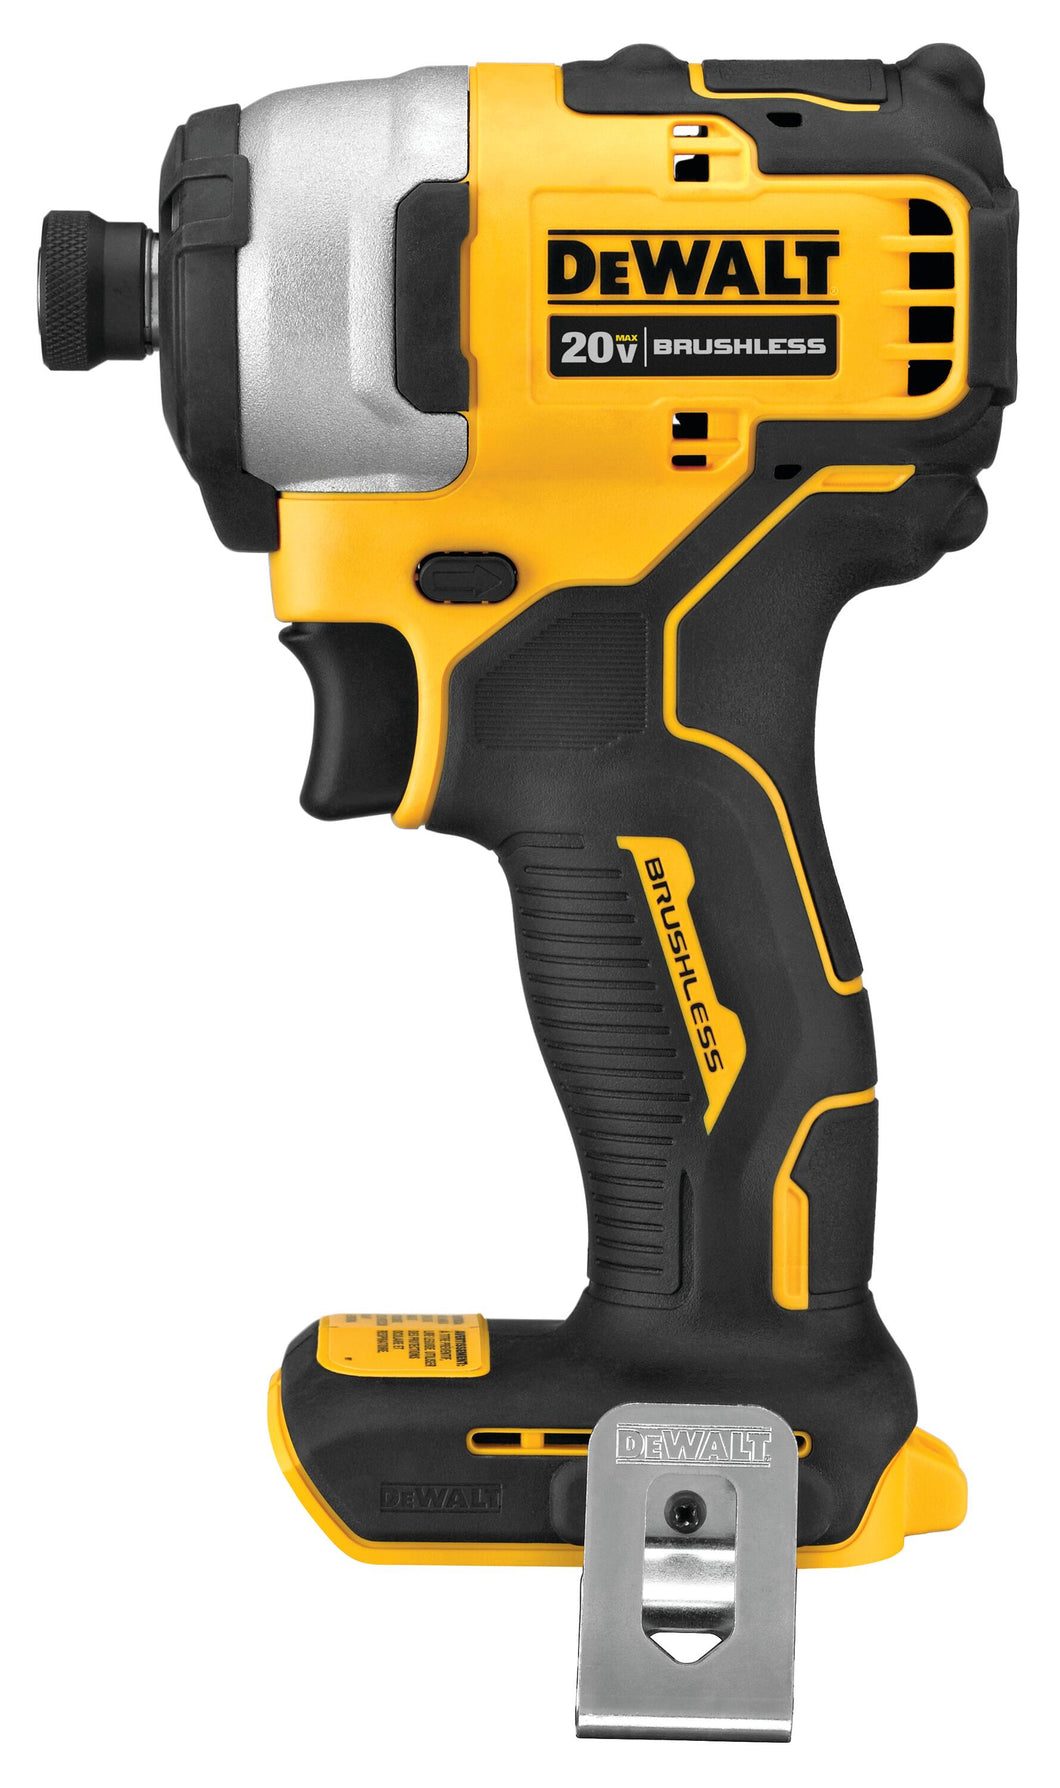 Dewalt Atomic 20V MAX* Brushless Cordless Compact Impact Driver, TOOL ONLY (1/4